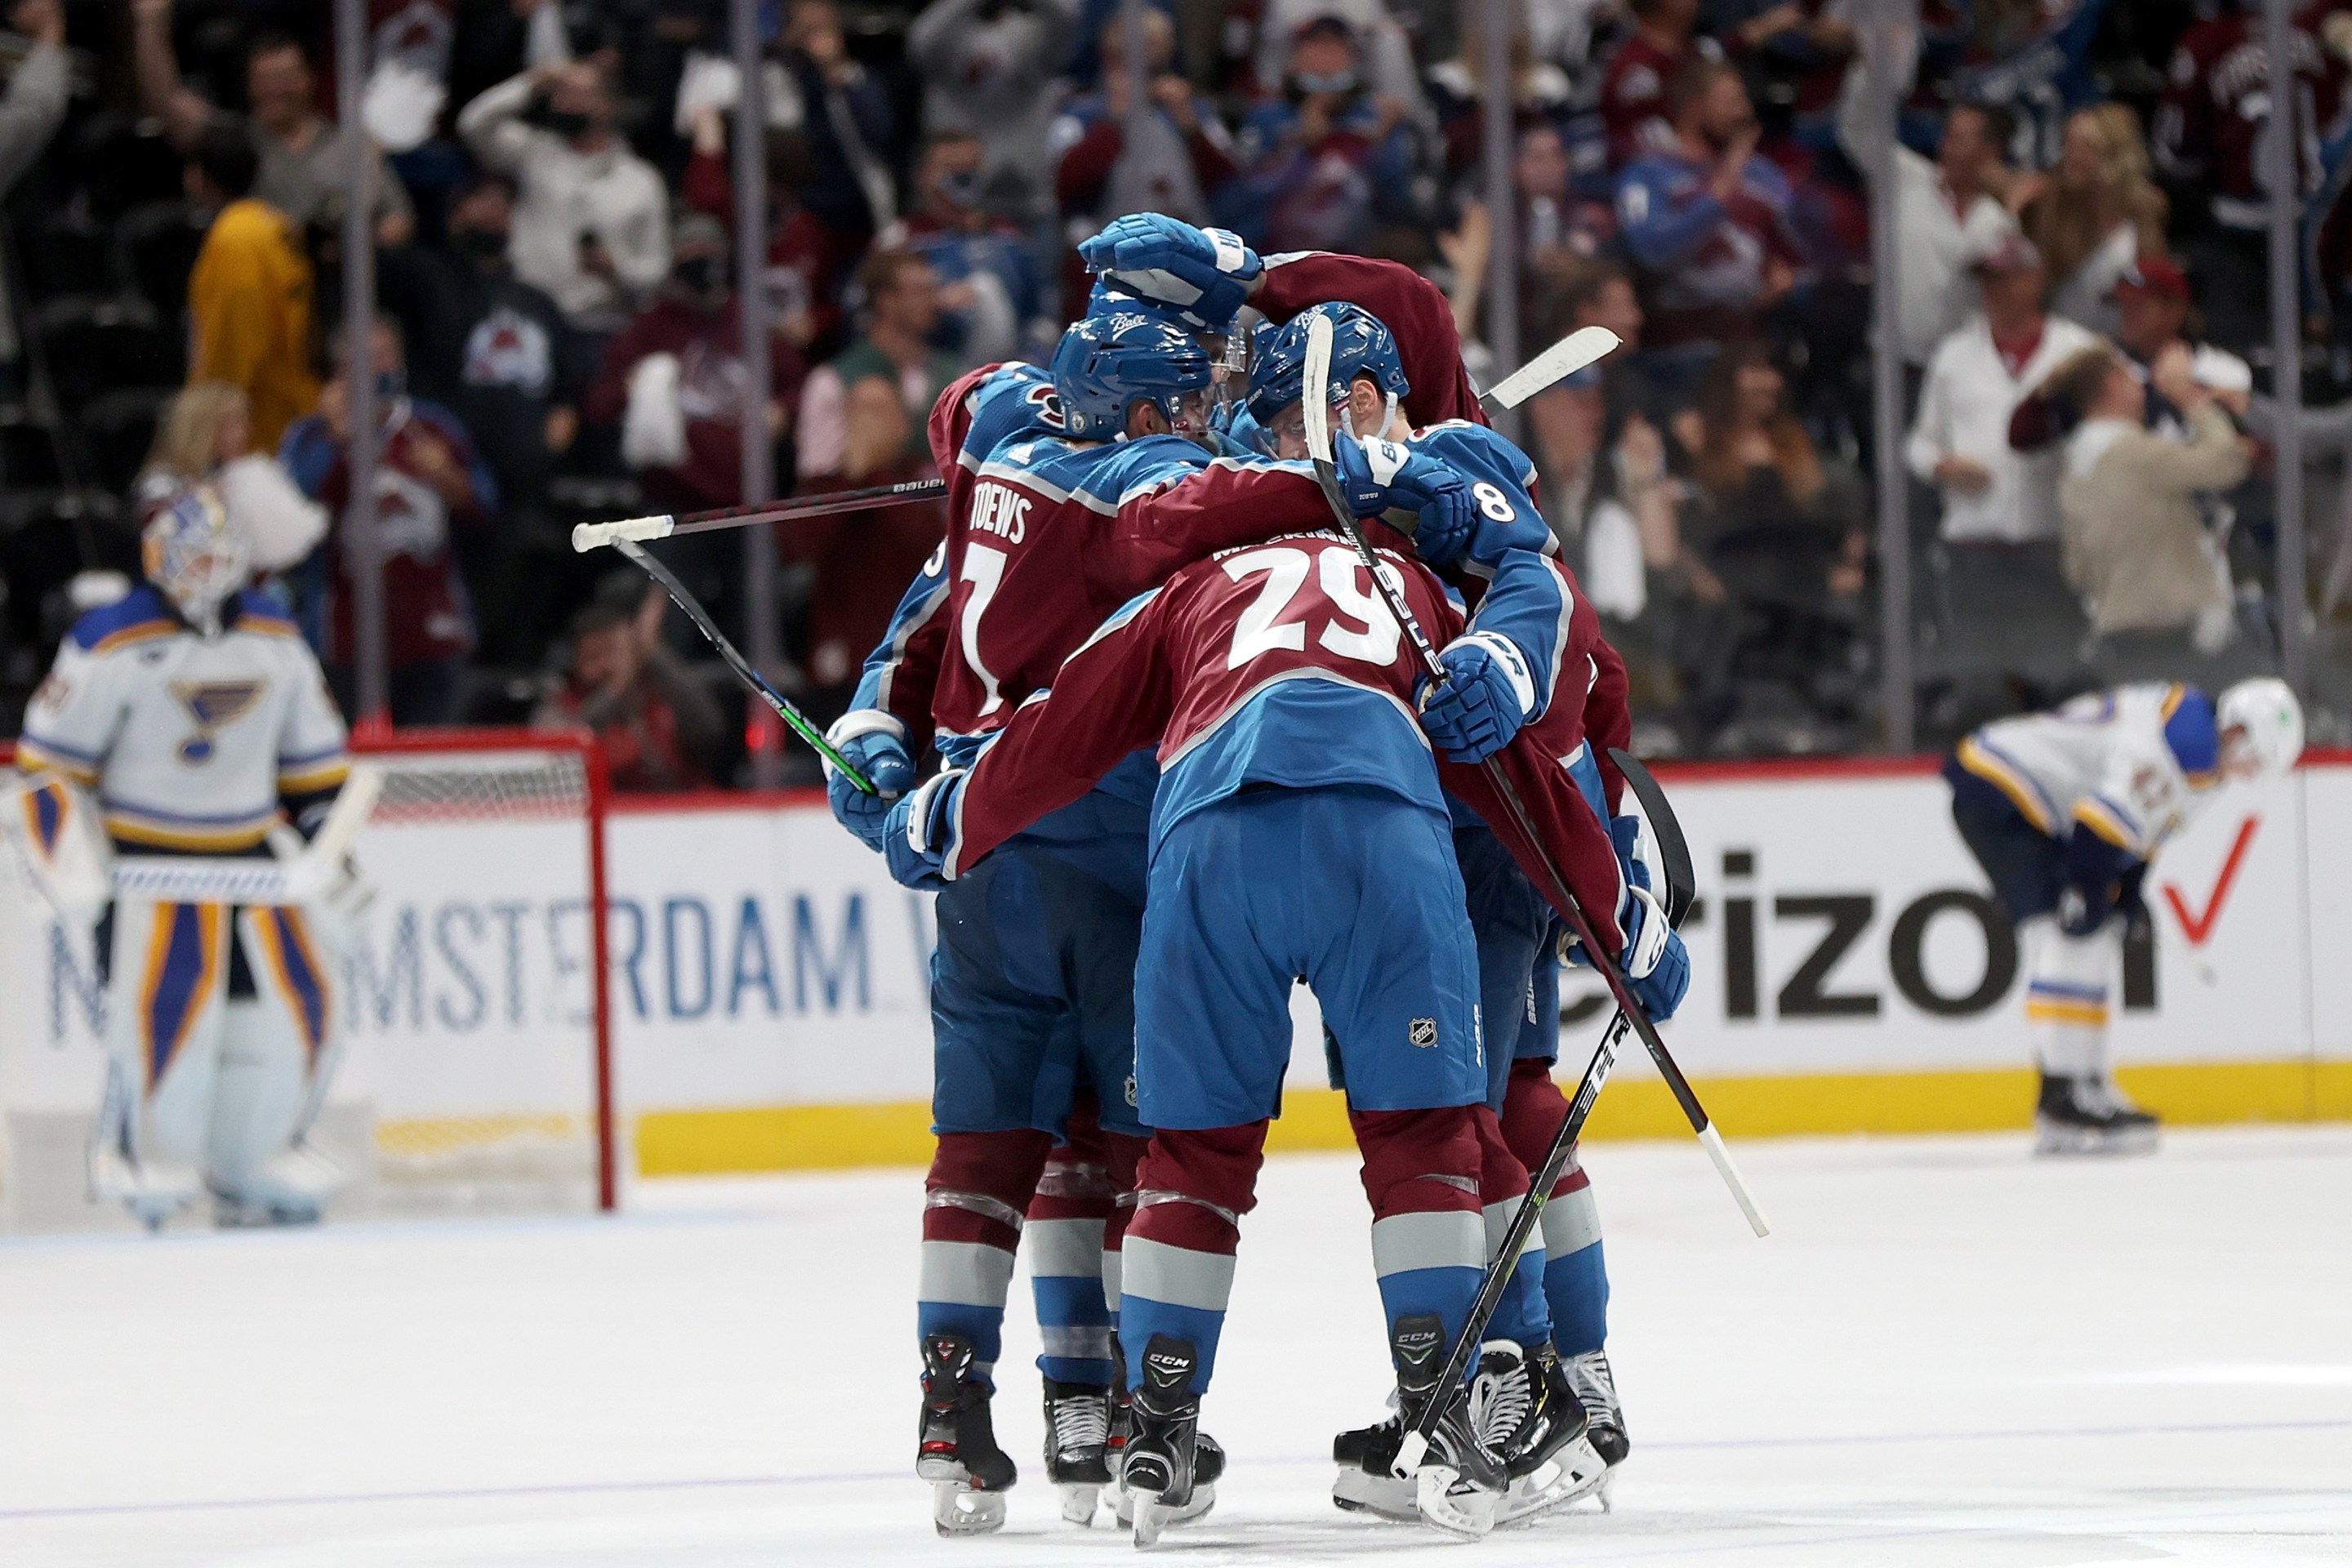 The Colorado Avalanche celebrate a goal by Nathan MacKinnon